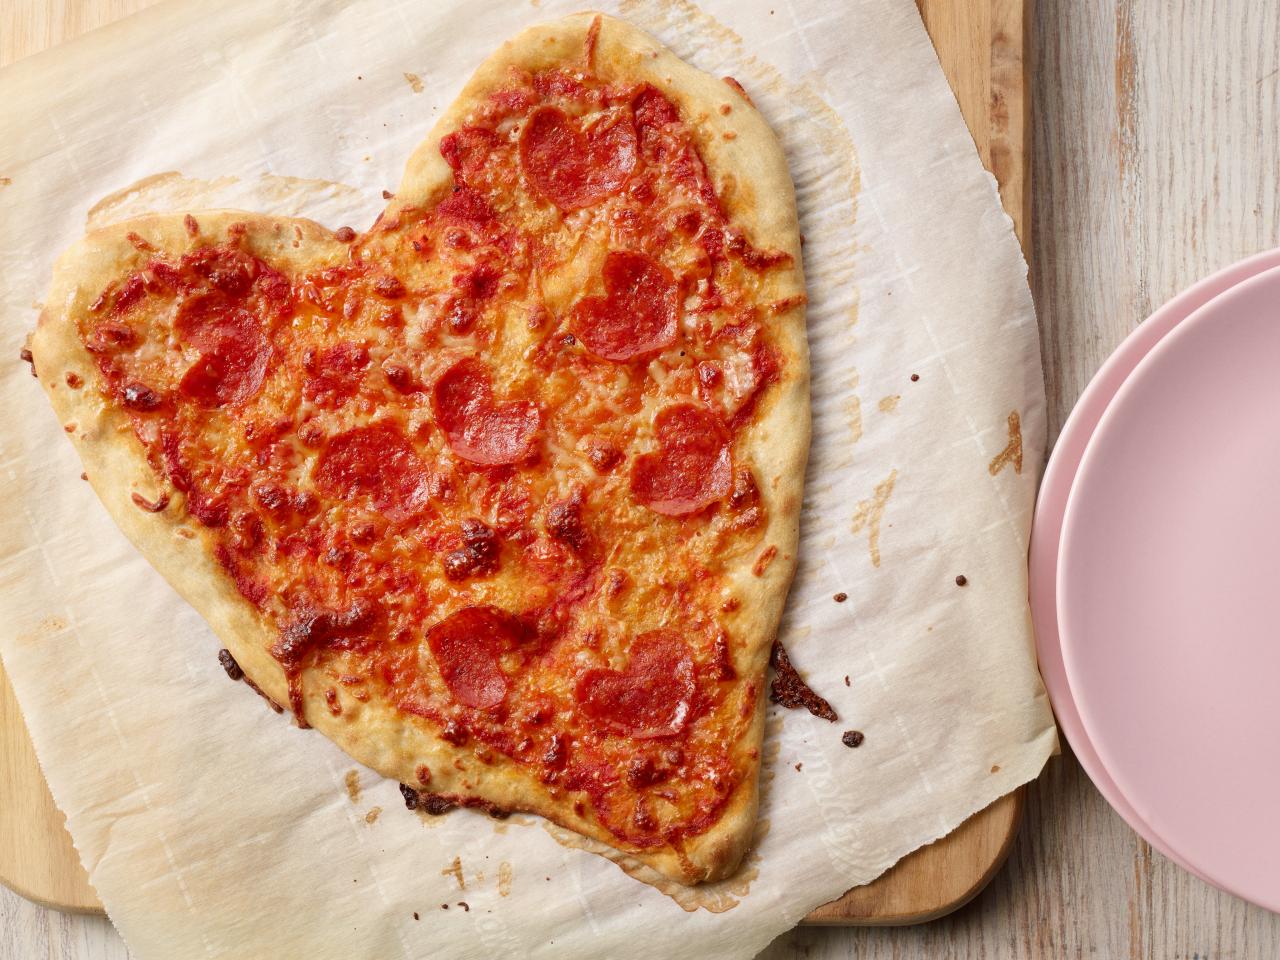 Heart-Shaped Pizza Recipe - How To Make At Home Or Order In - Brit